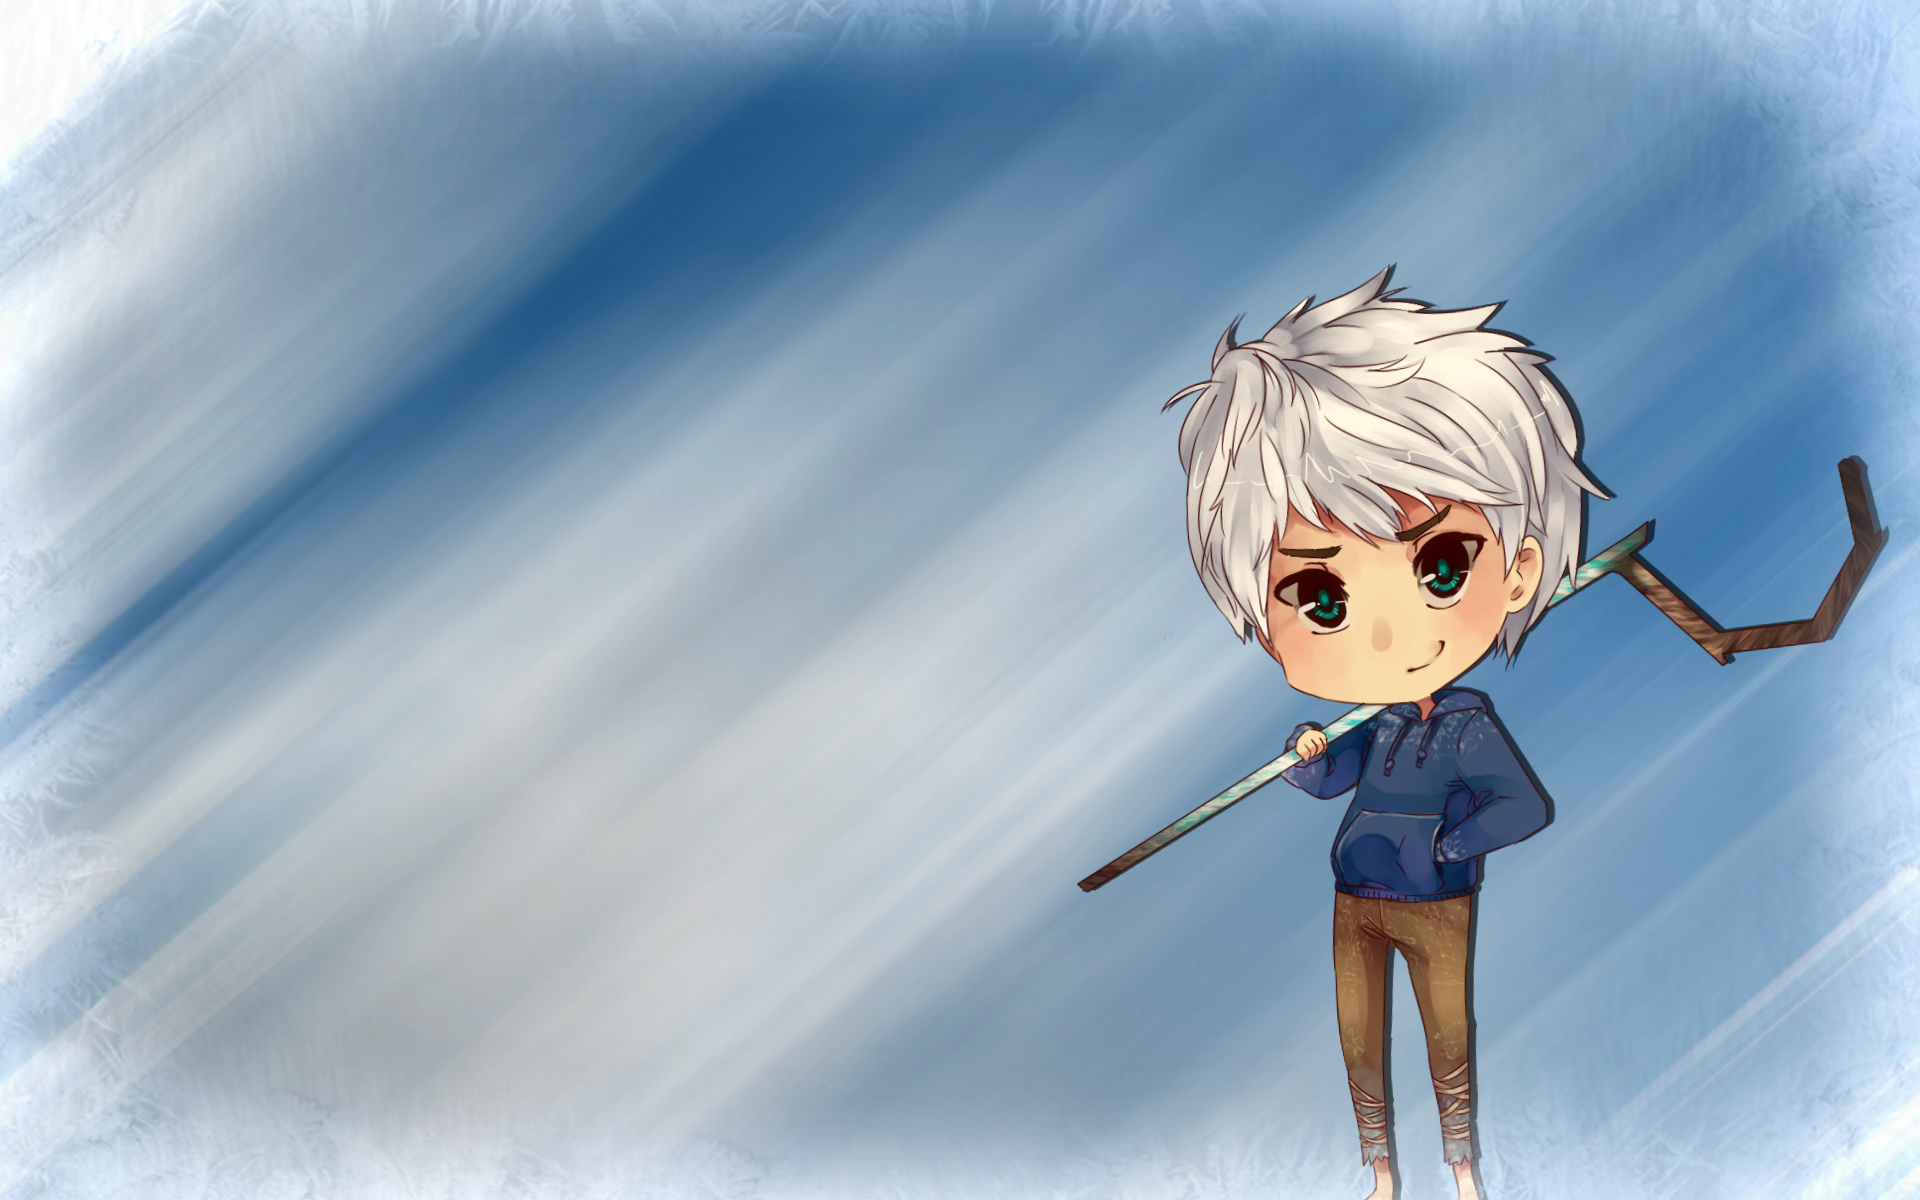 Jack Frost Wallpapers